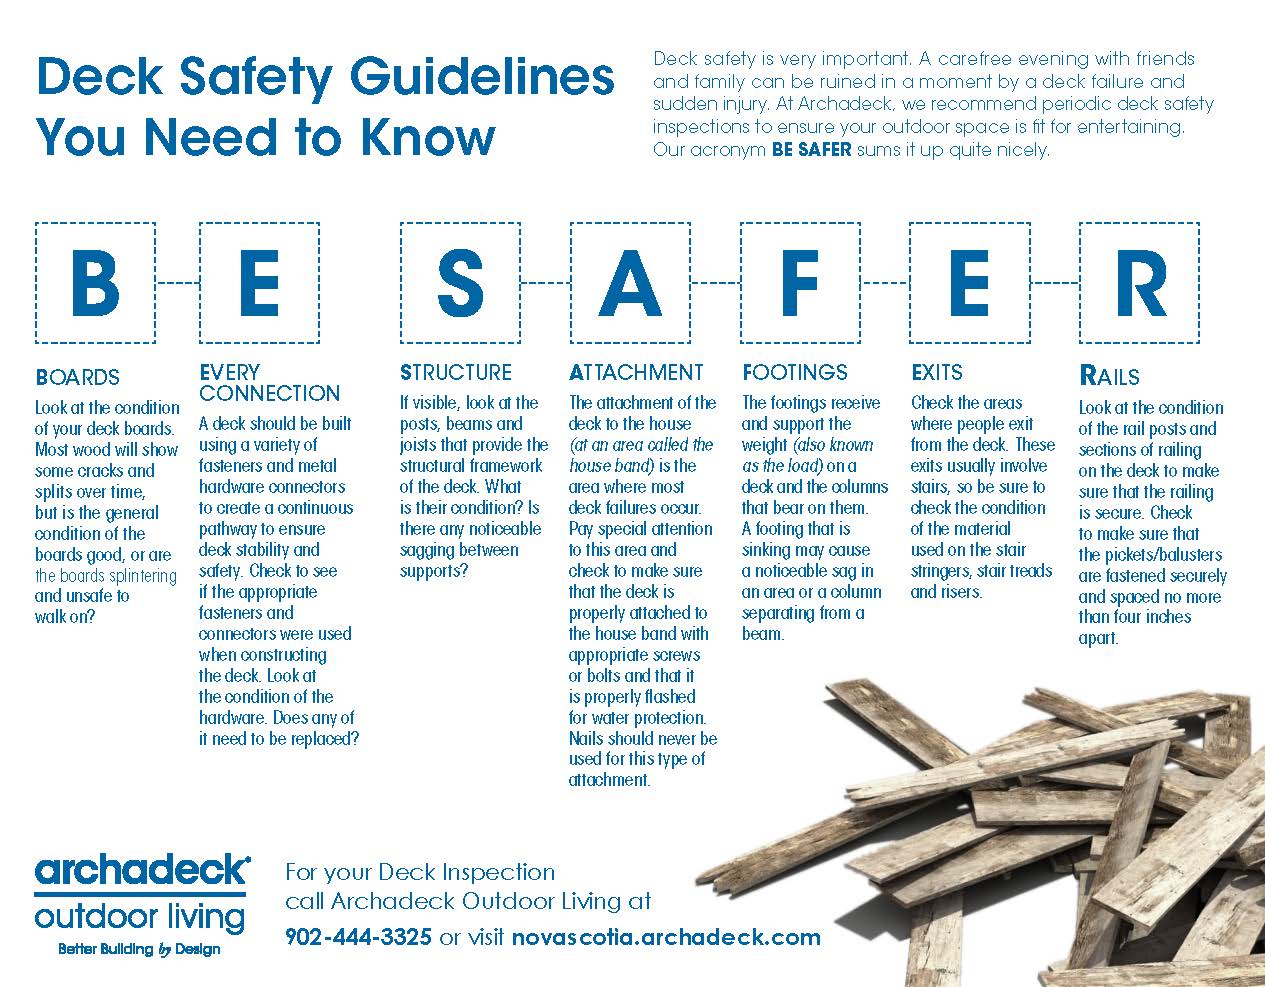 Deck Safety Guidelines Infographic